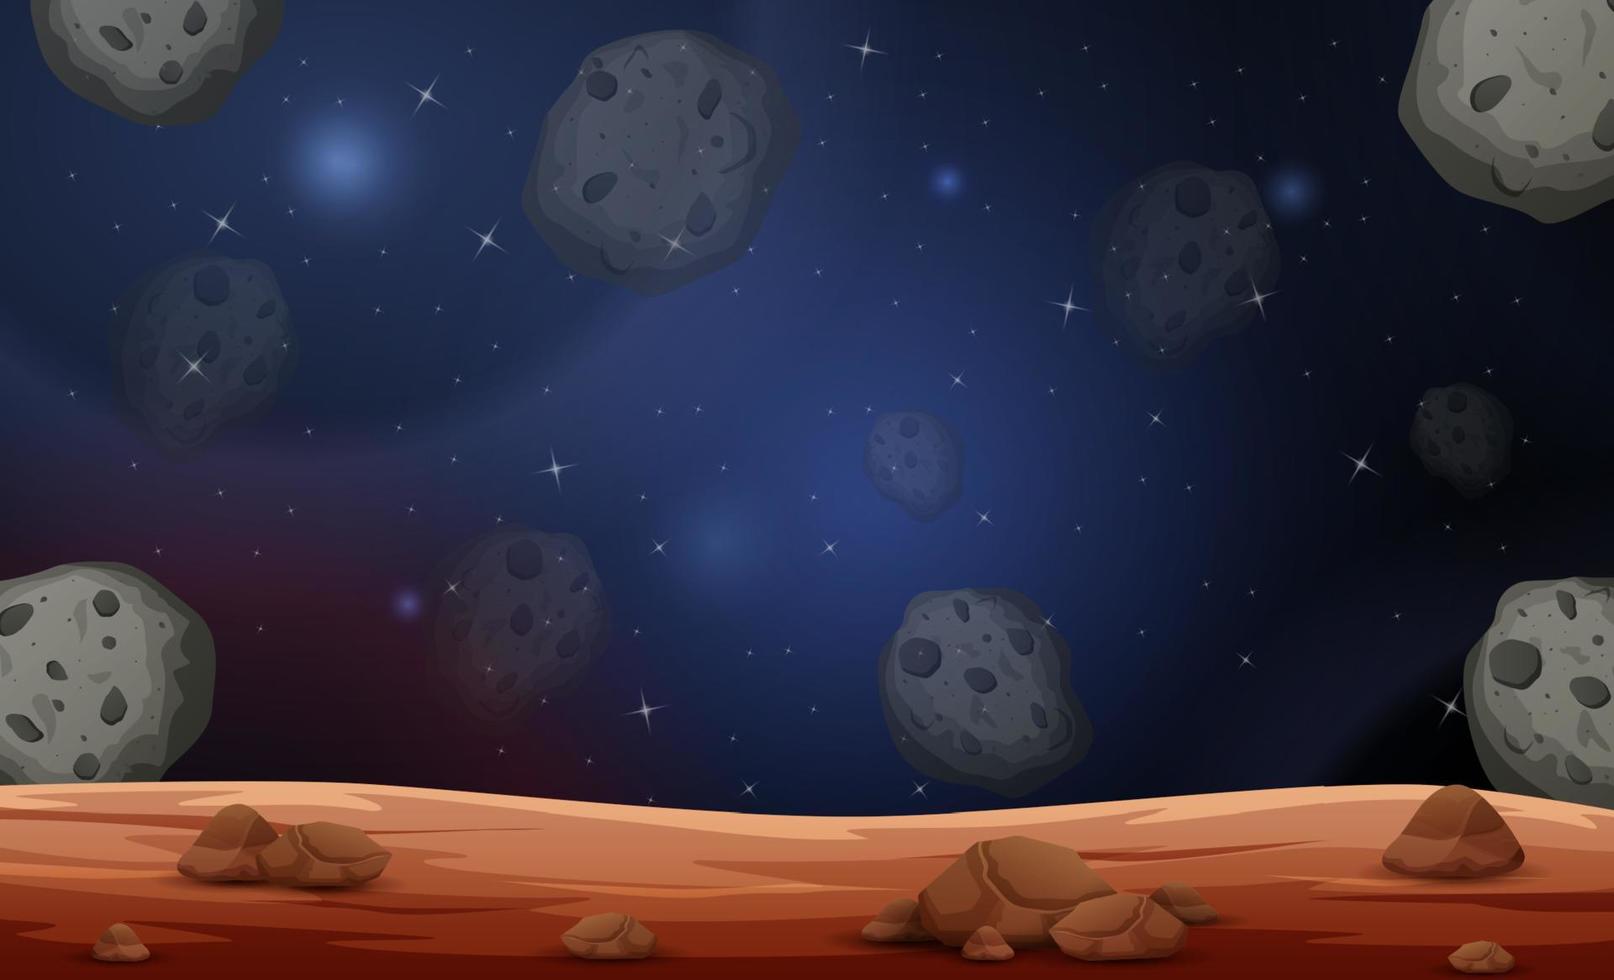 Moon scene with asteroids illustration vector